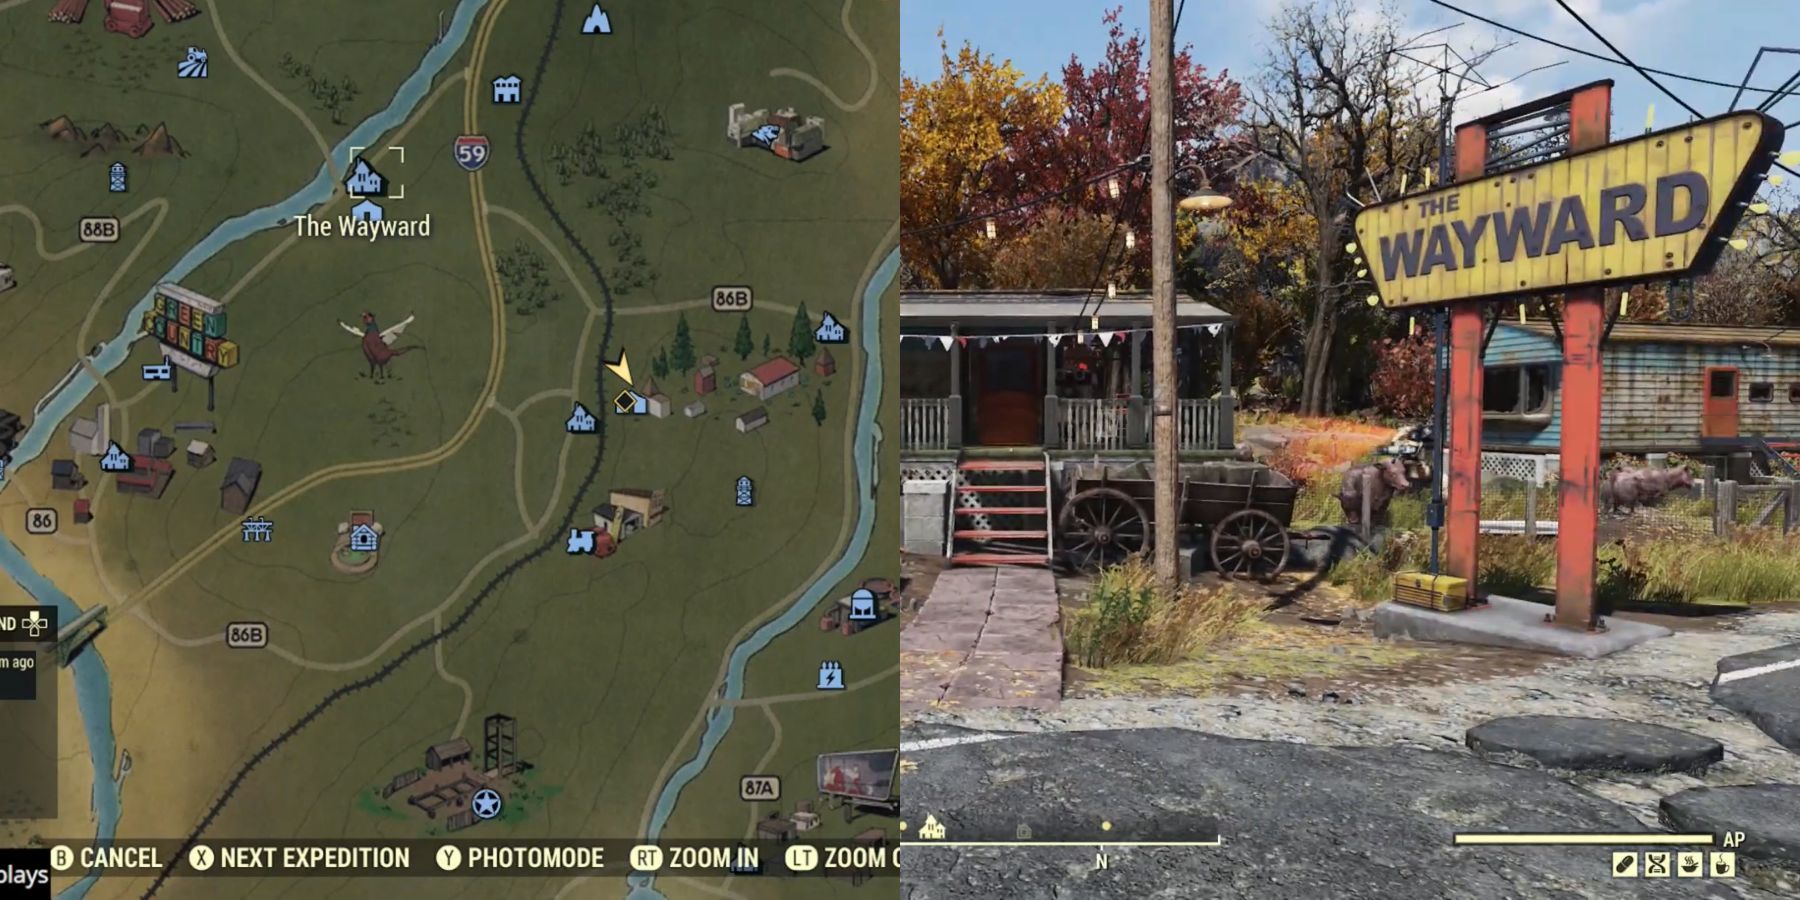 image showing the wayward junk material farm location in fallout 76.